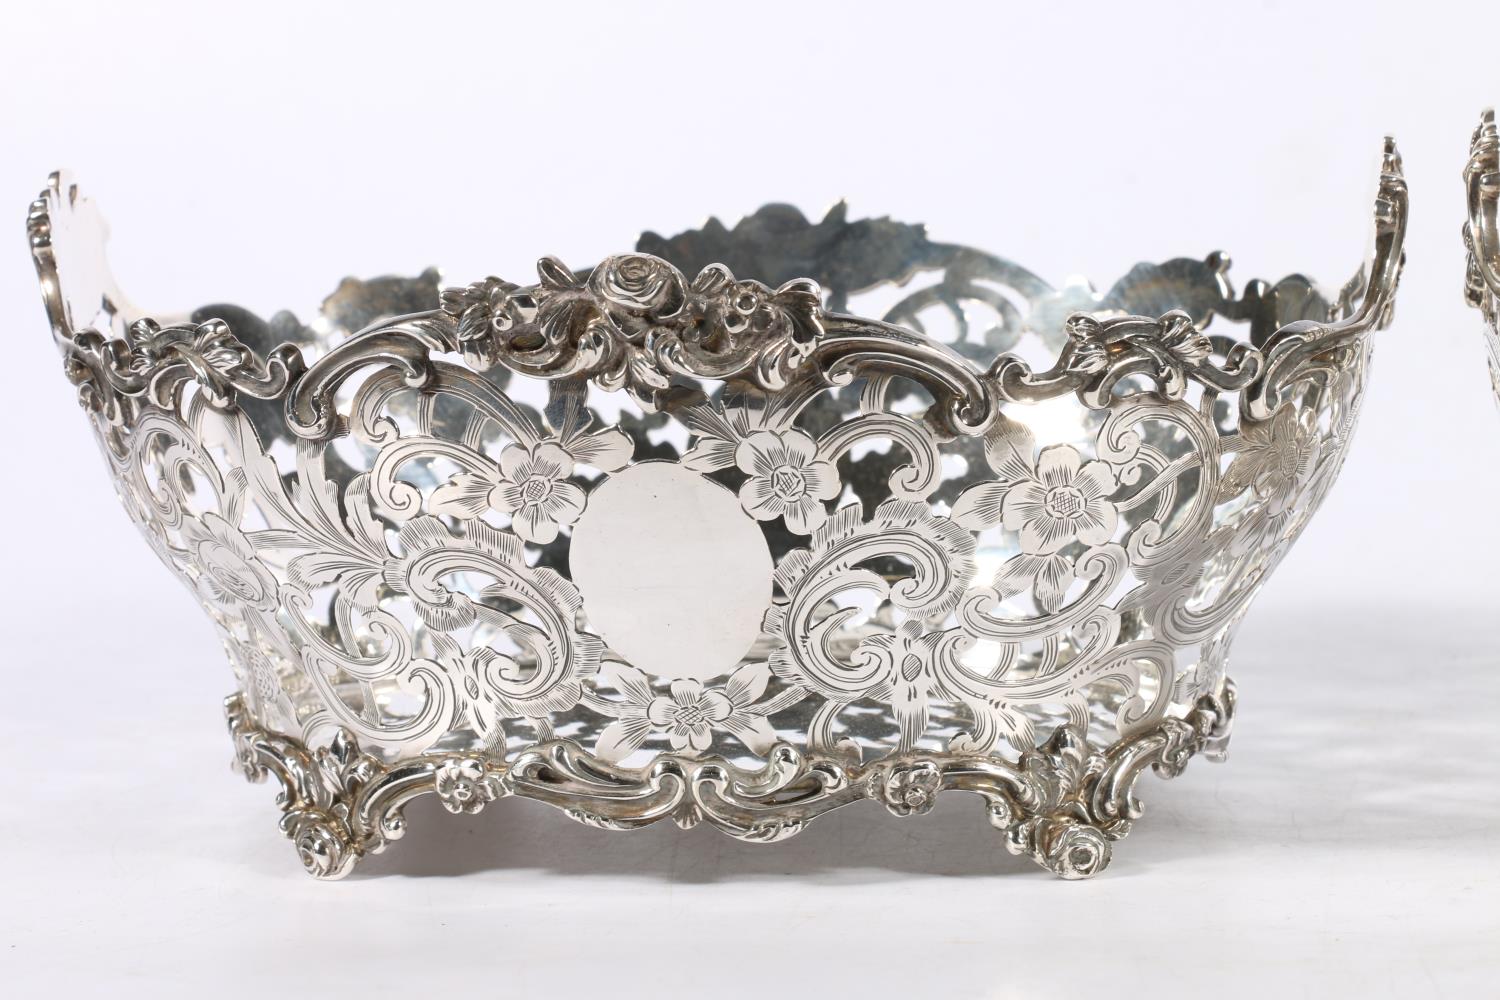 Two Victorian silver baskets with ornate relief and pierced work floral bodies, different makers - Image 3 of 4